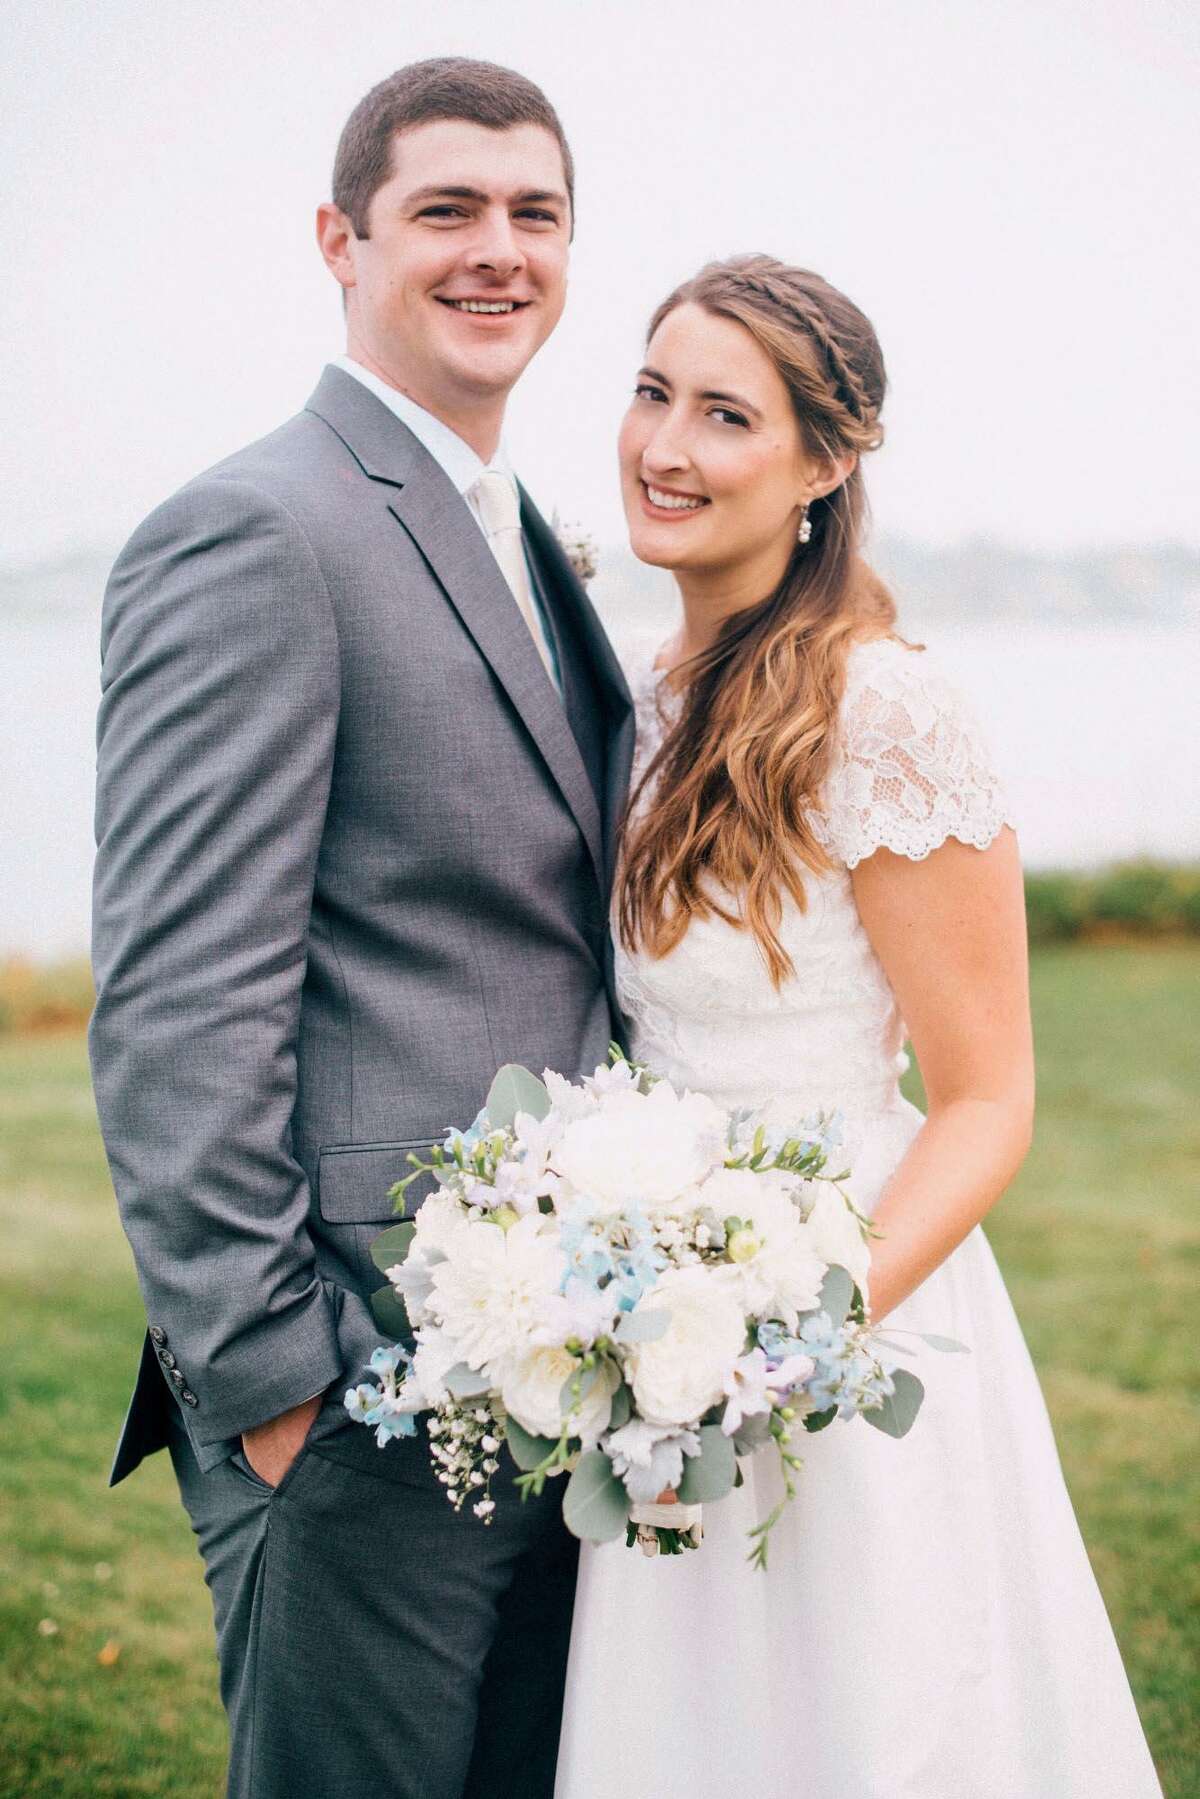 Stephanie Anne Miller and Tyler Christian Arpin were married Aug. 19 in Kittery Point, ME.